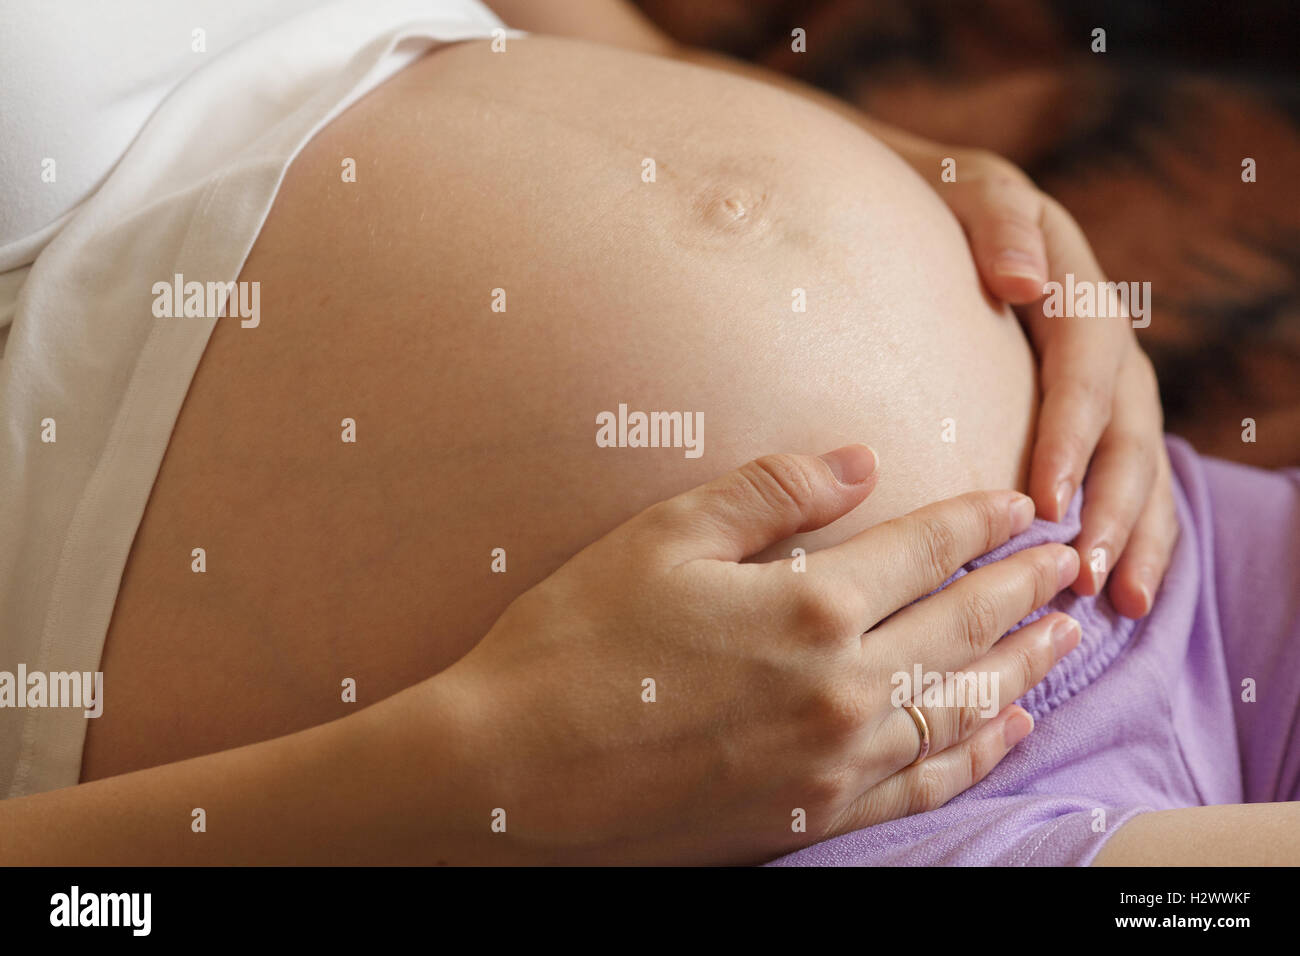 Young pregnant woman holding and touching her belly, closeup Stock Photo